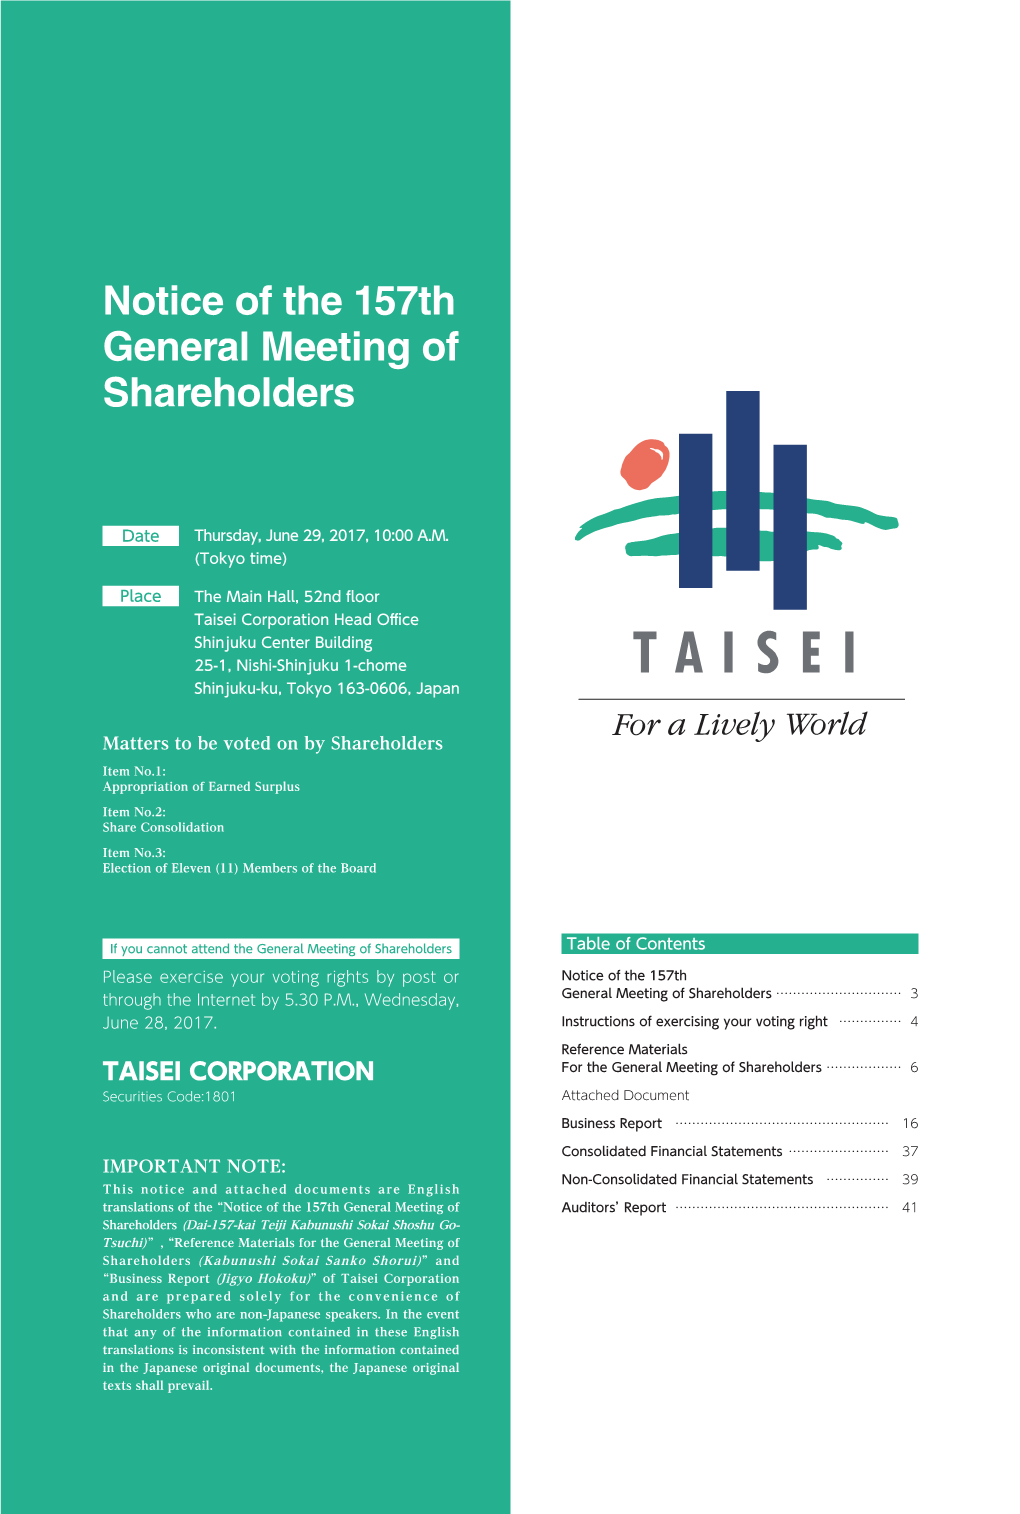 Notice of the 157Th General Meeting of Shareholders